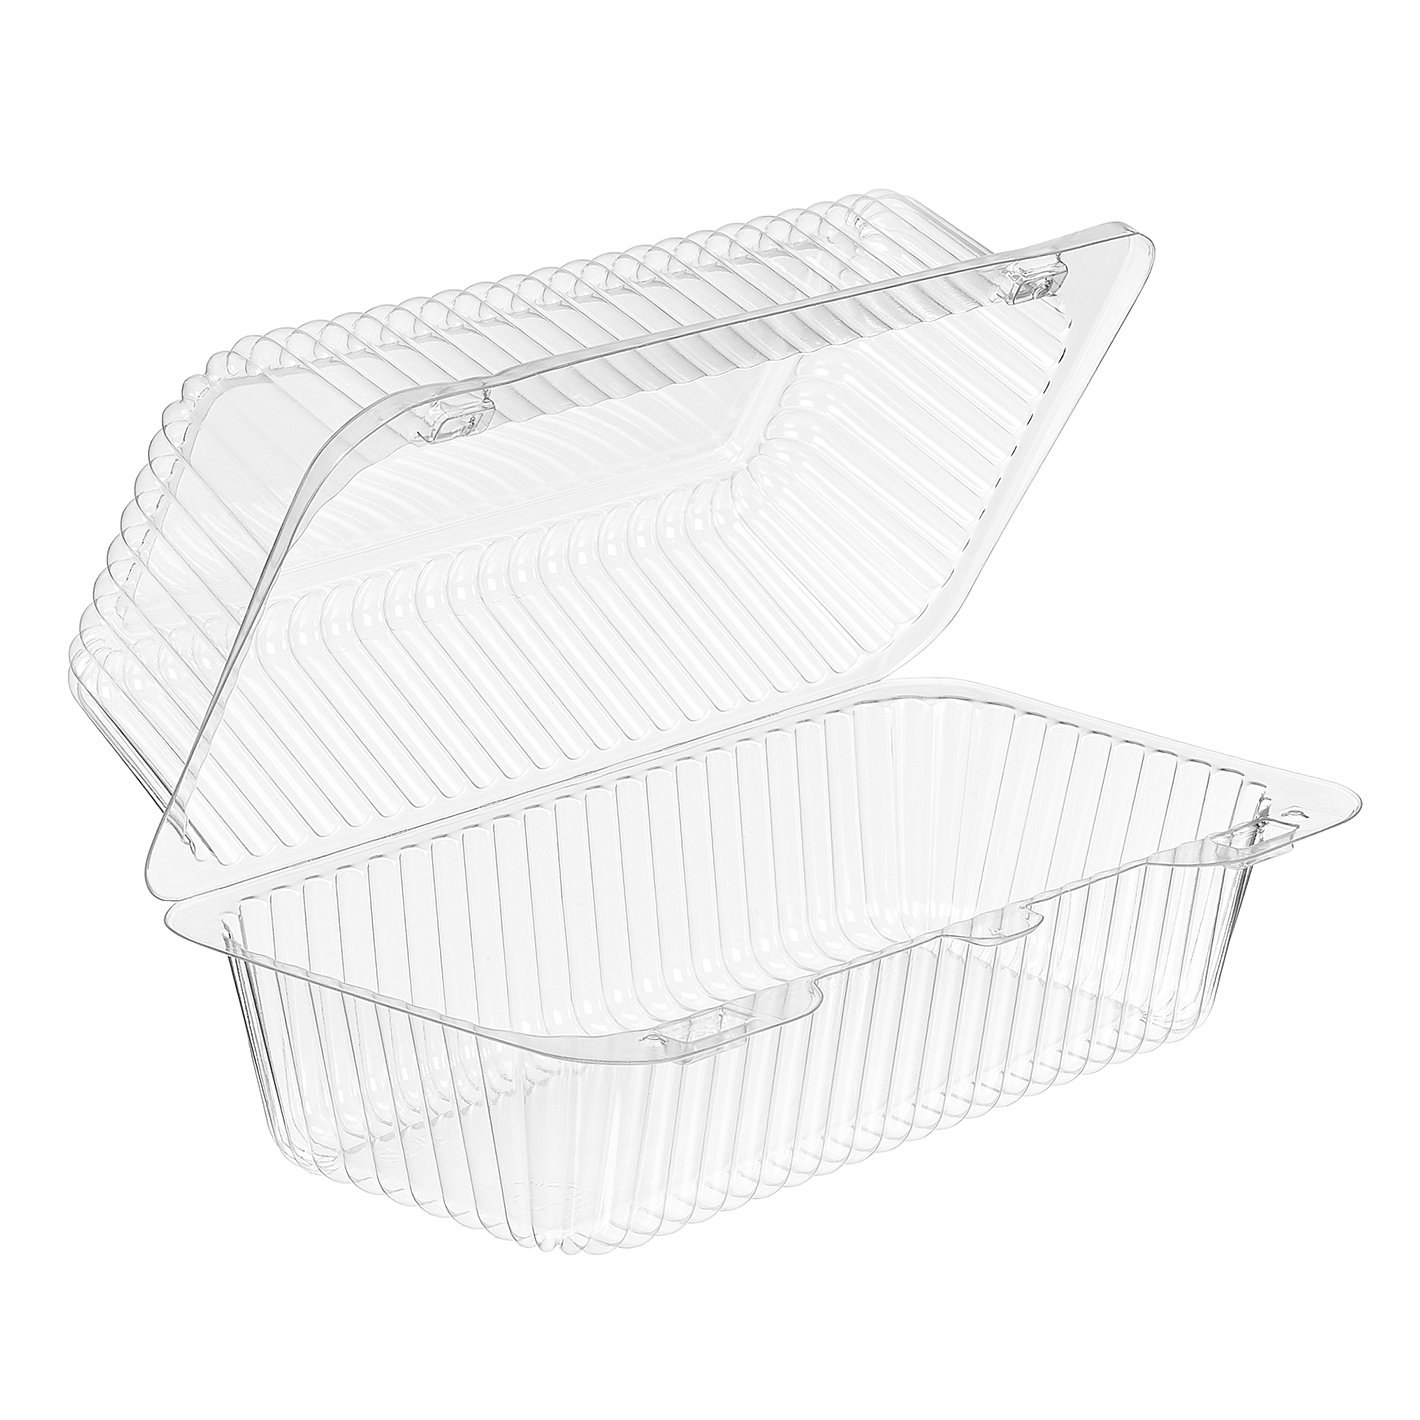 8.5" x 4.5" x 3.75" Surelock® Clear Hinged Cake/Loaf/Danish Container SLP19 300/case